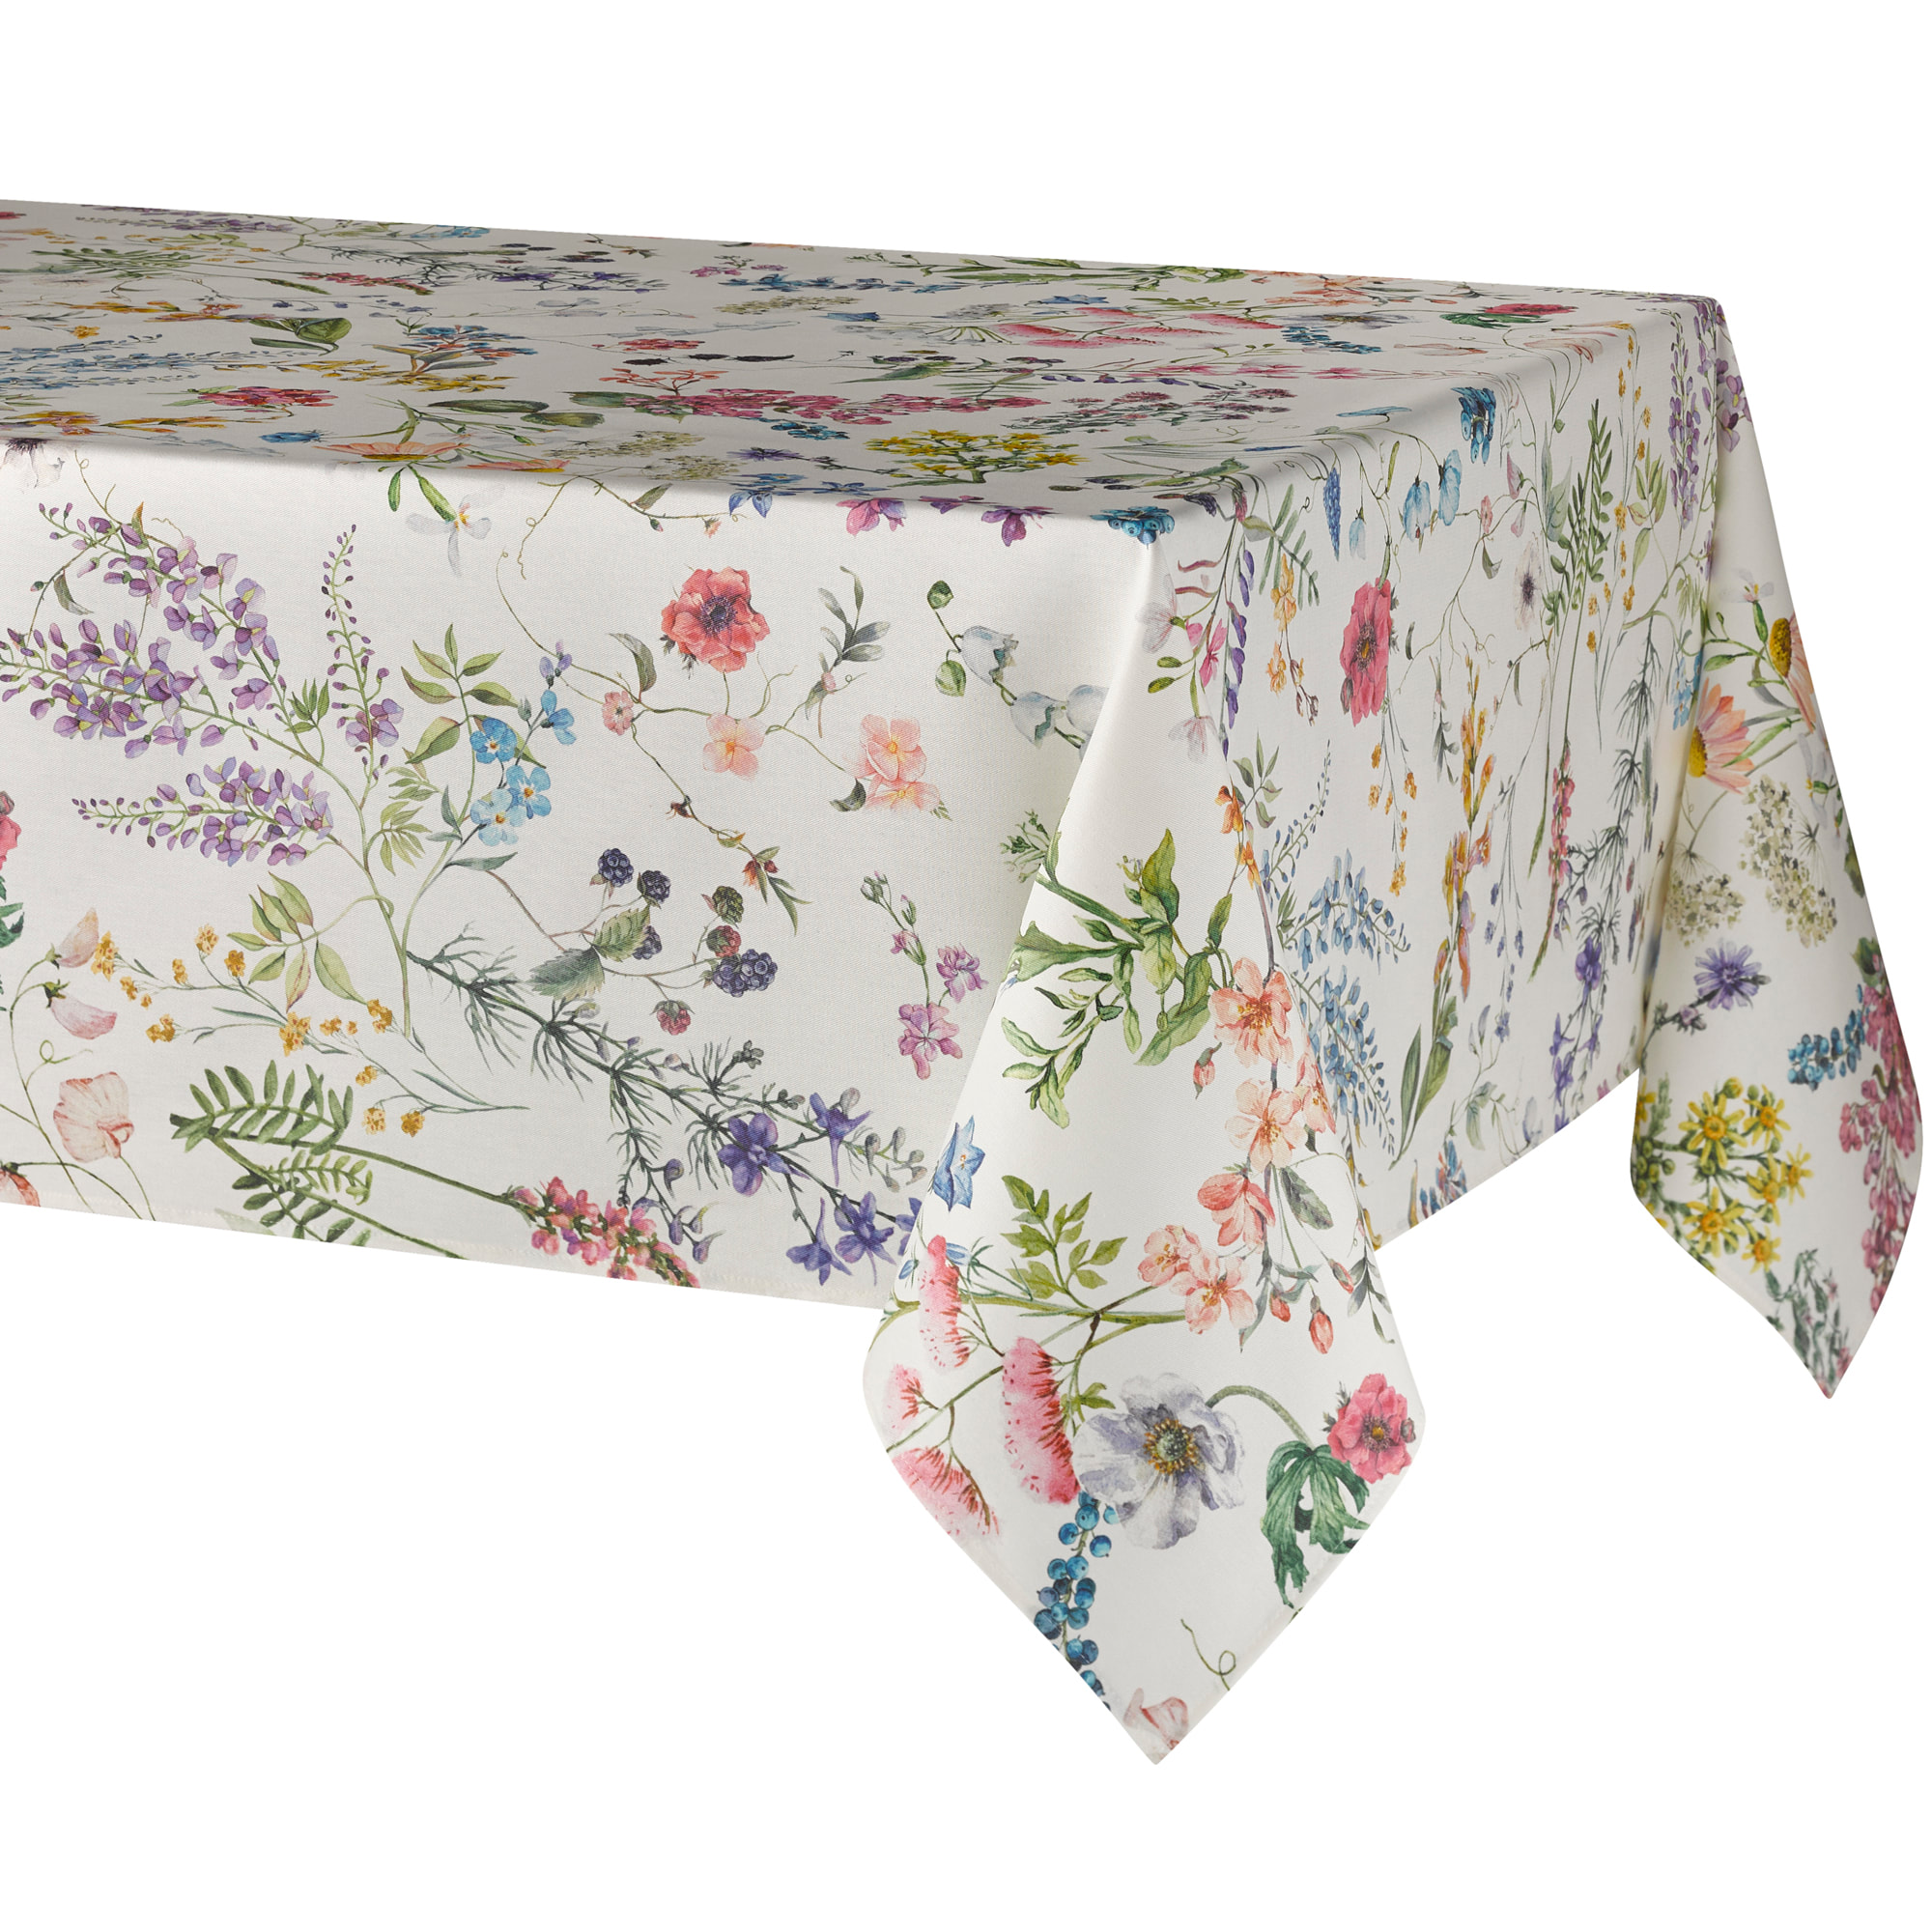 SYLVIE French Country Wildflowers Berries Rectangle Table cloths ...